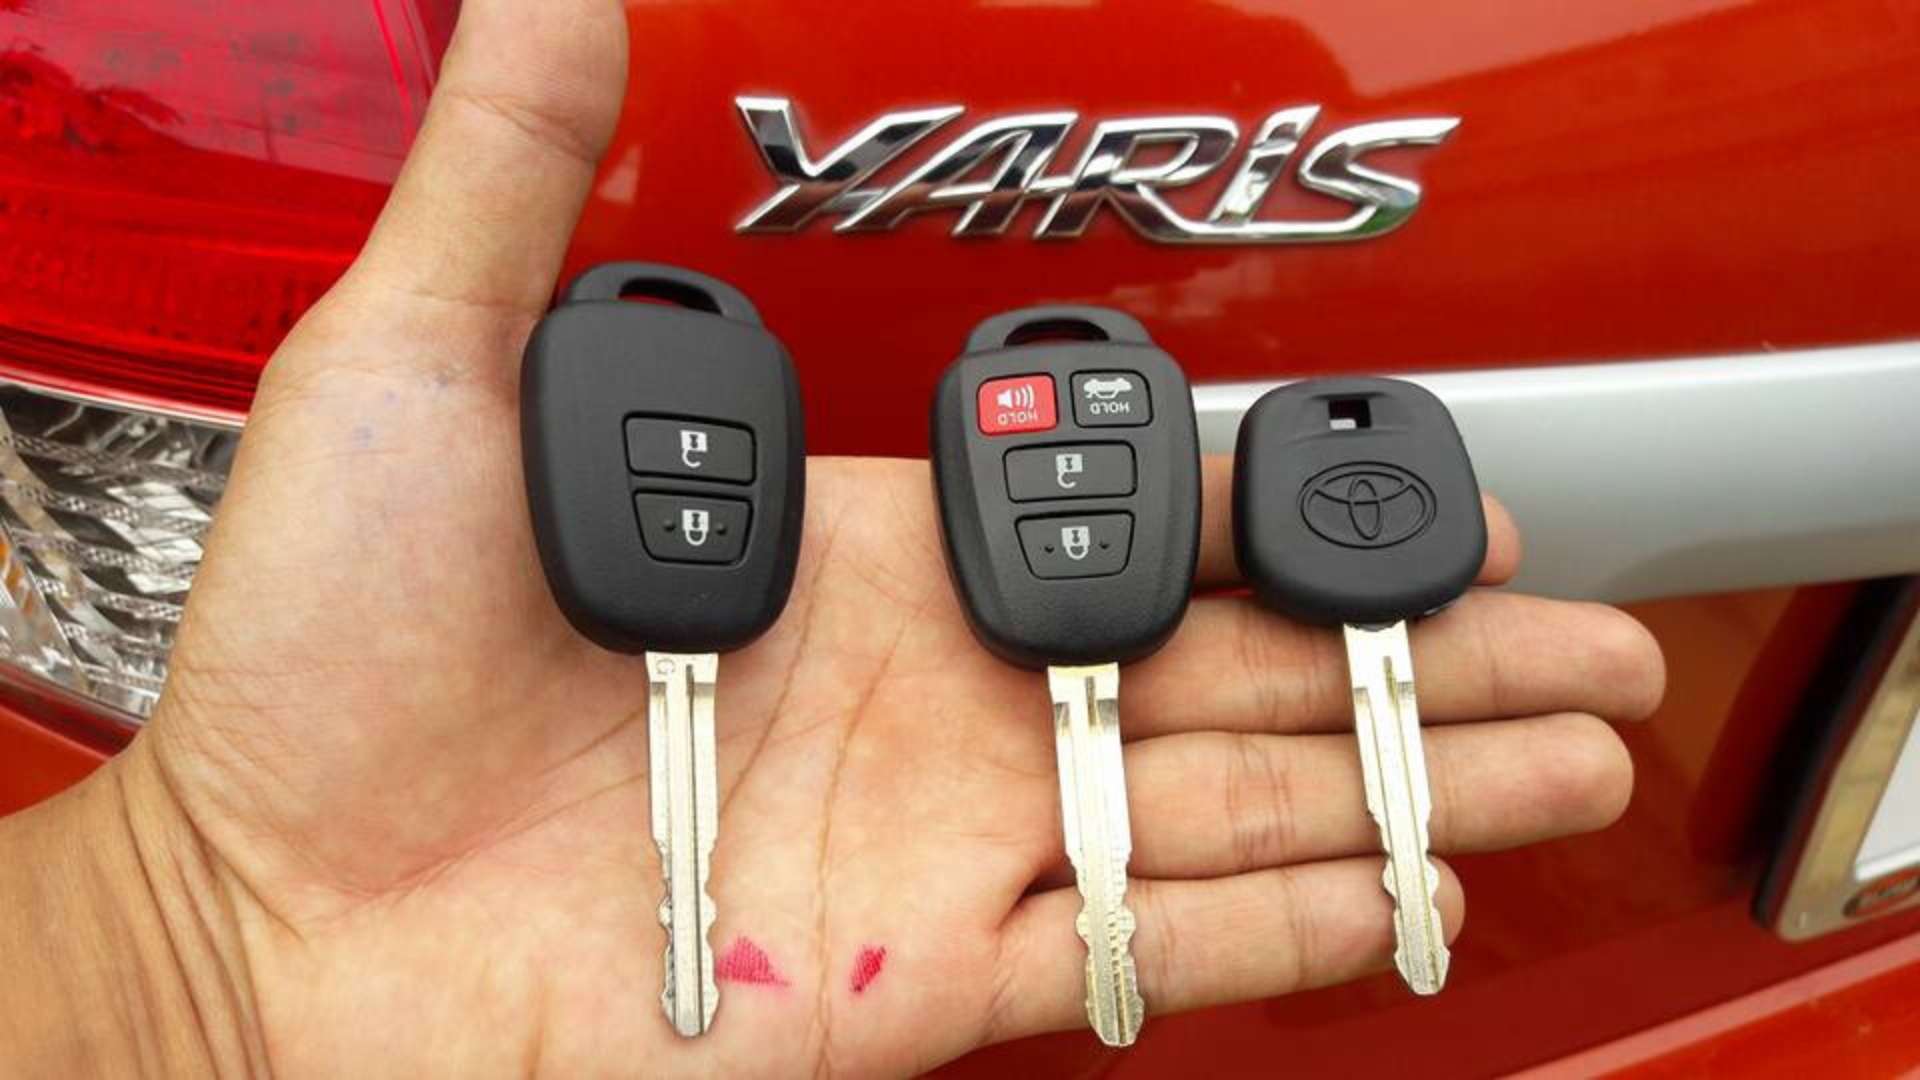 A locksmith holding different Toyota key replacement options for the Yaris model